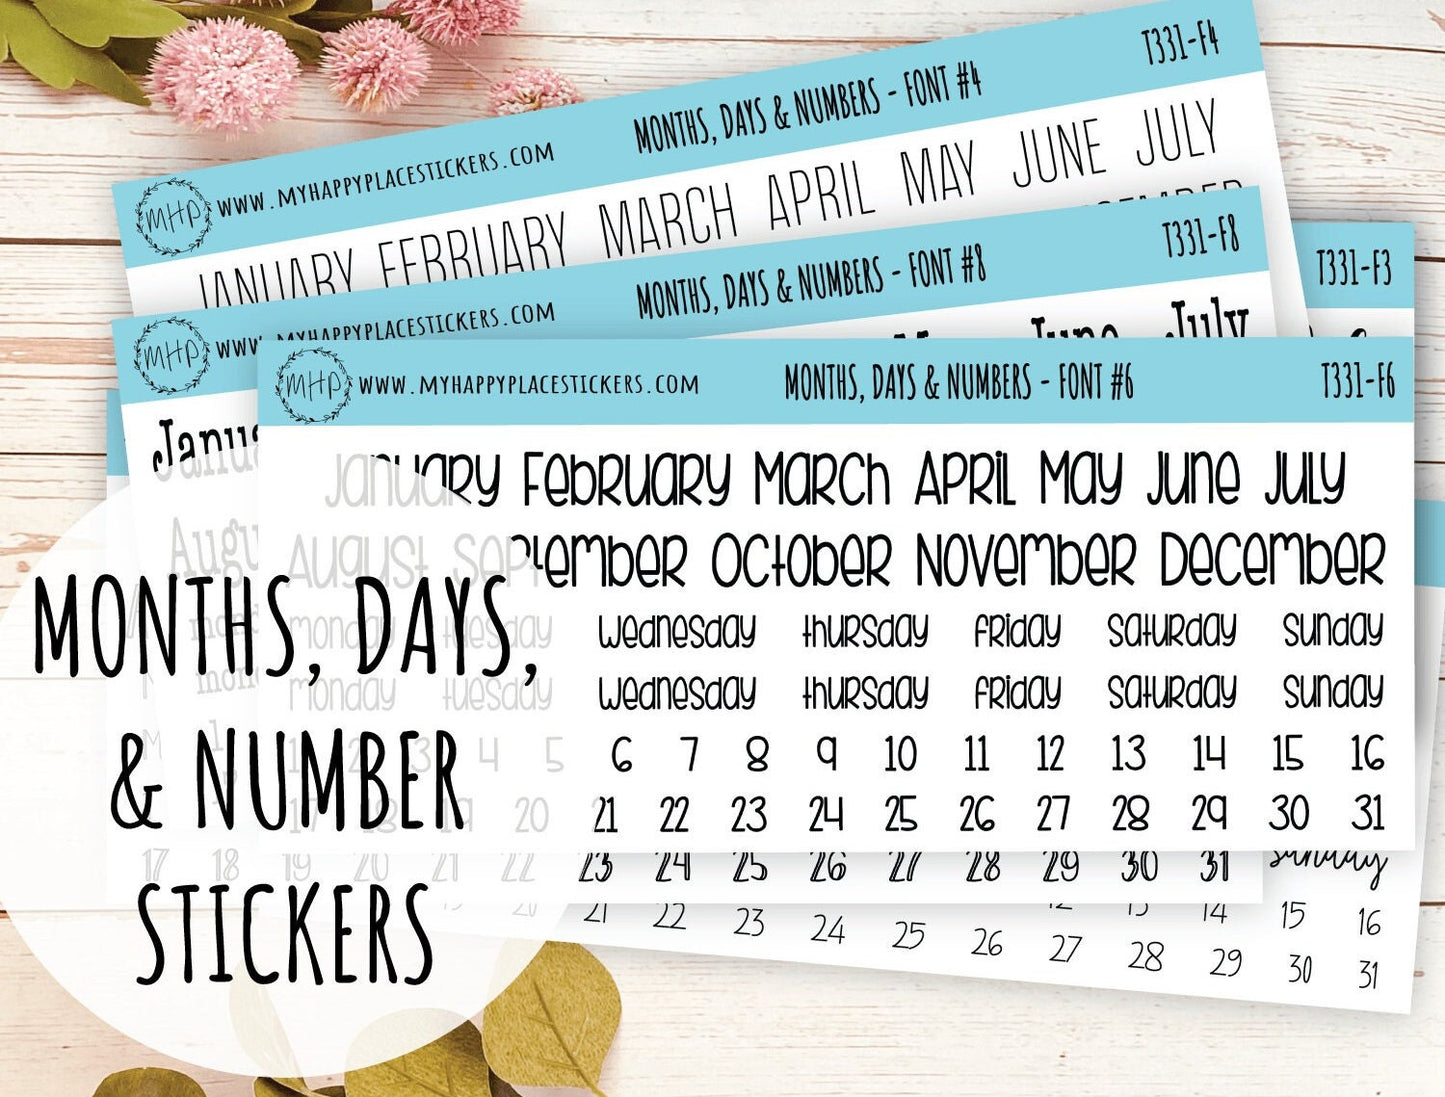  12 Monthly Planner Date Sticker Set, Calendar Number Date  Stickers, Decorative Planner Sticker for Customizing Undated Planners,  Notebooks : Office Products